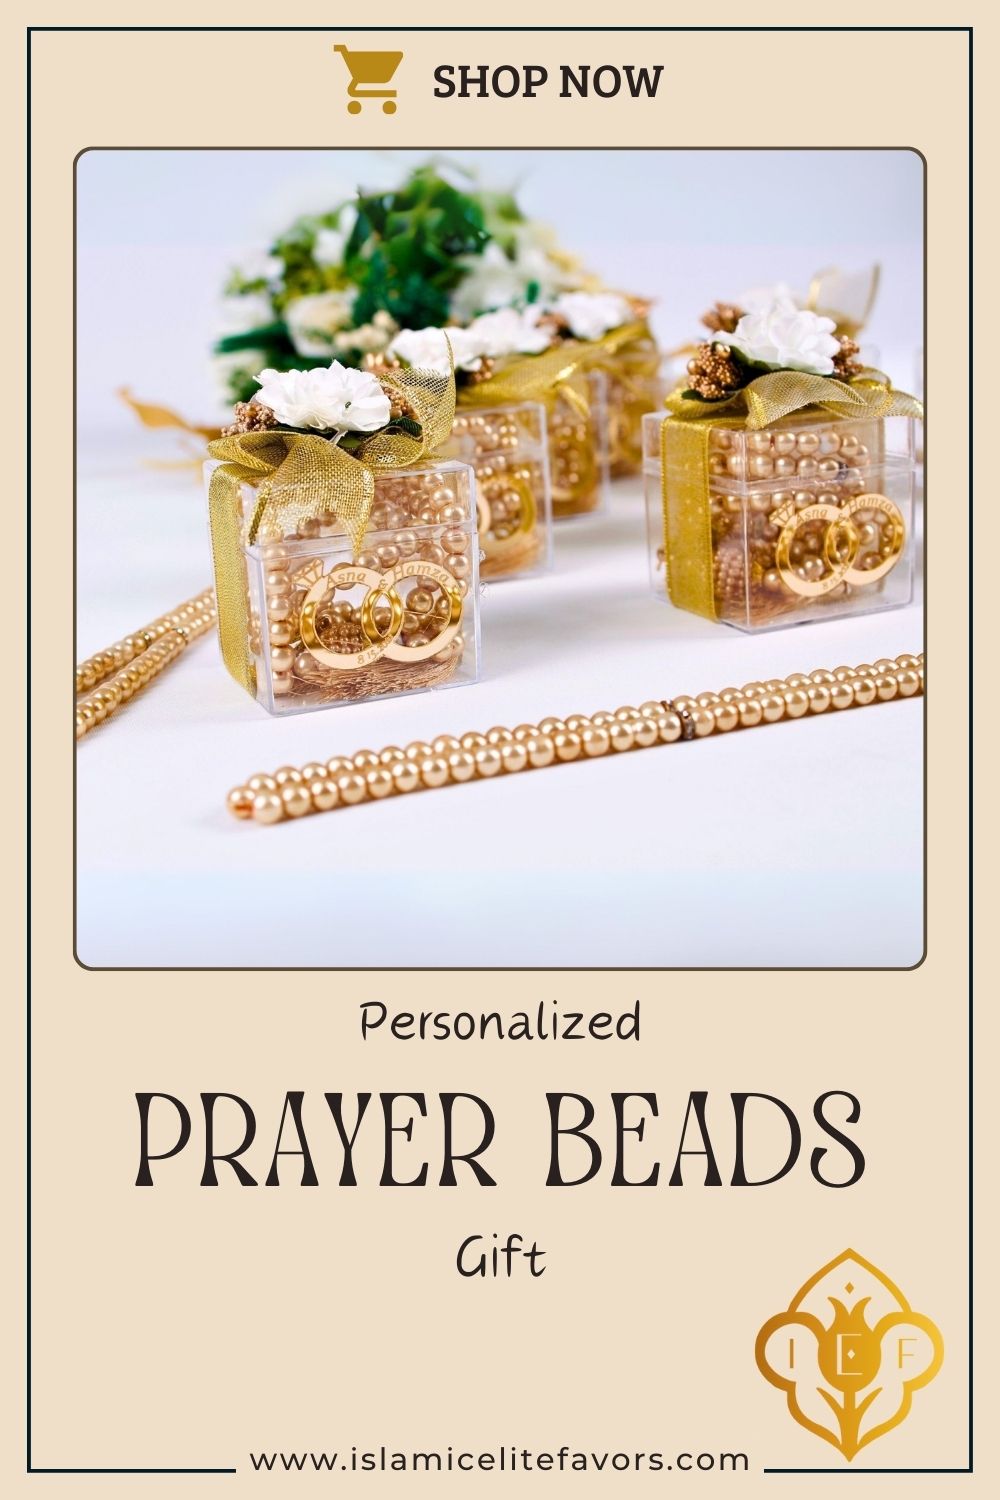 Personalized Prayer Bead Wedding Favor Decorated Box with Wedding Ring - Islamic Elite Favors is a handmade gift shop offering a wide variety of unique and personalized gifts for all occasions. Whether you're looking for the perfect Ramadan, Eid, Hajj, wedding gift or something special for a birthday, baby shower or anniversary, we have something for everyone. High quality, made with love.